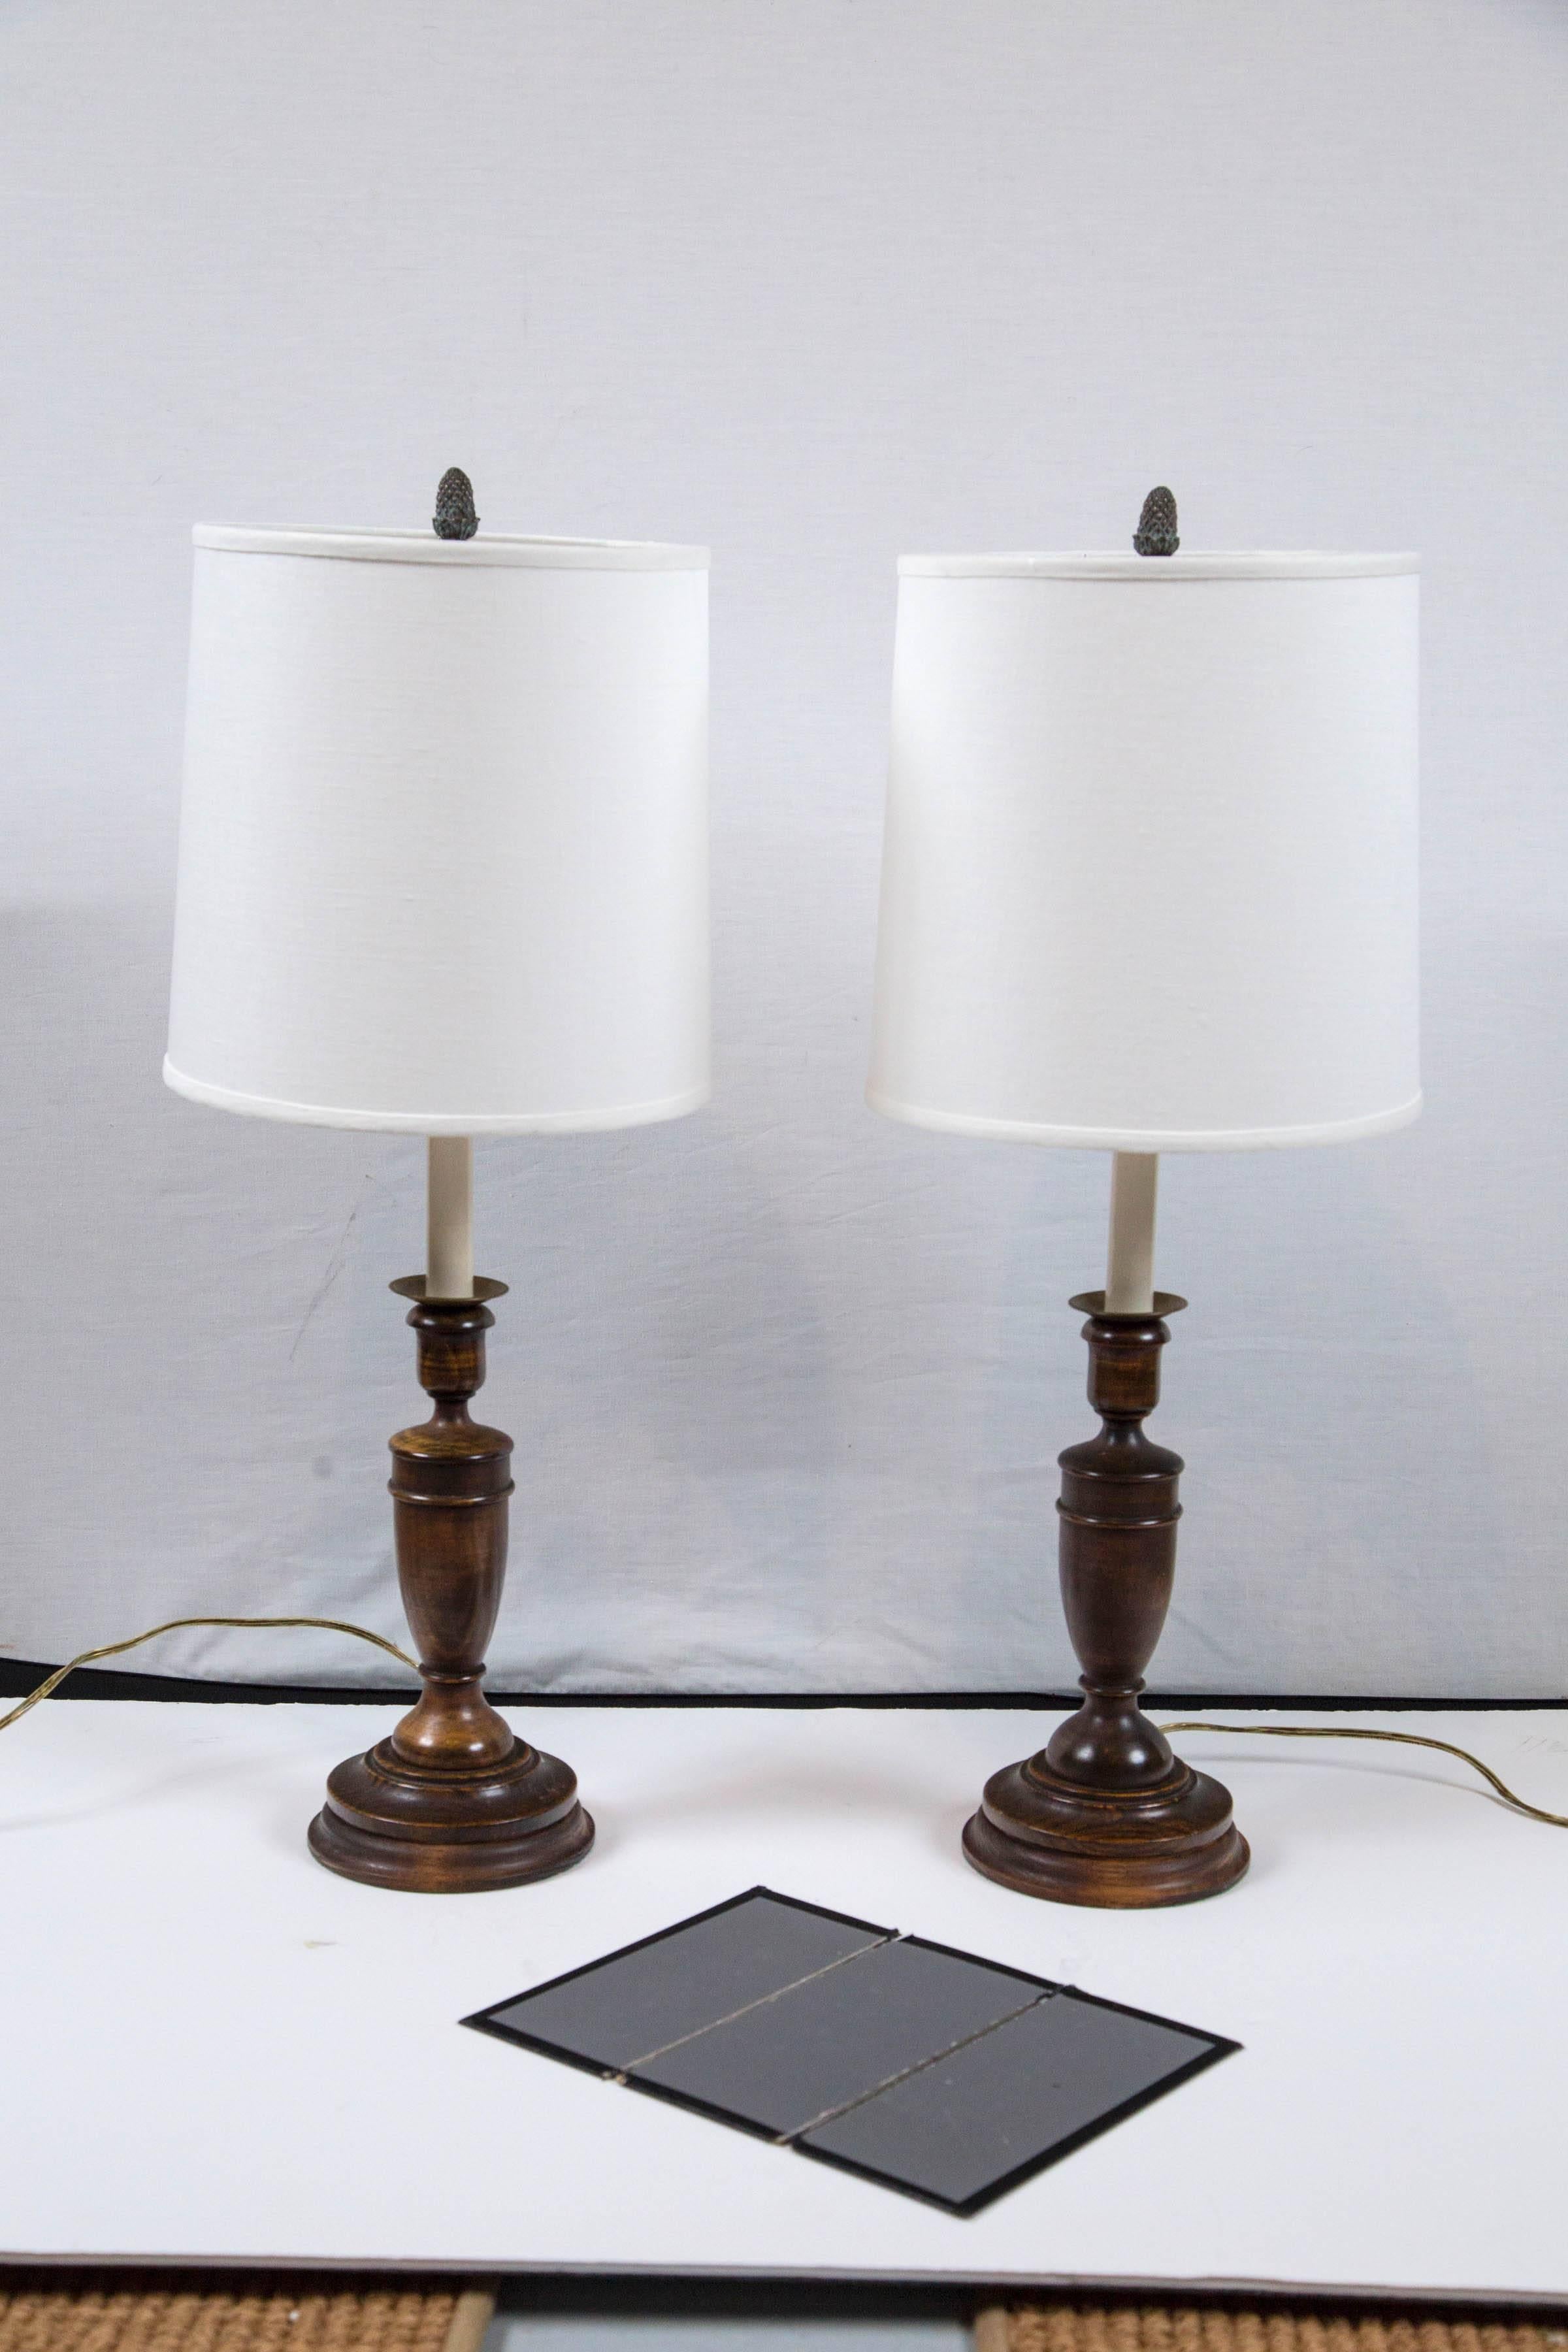 Pair of elmwood candlestick lamps, England, circa 1920. Rewired with new linen shades. Beautifully turned wood with rich patina.